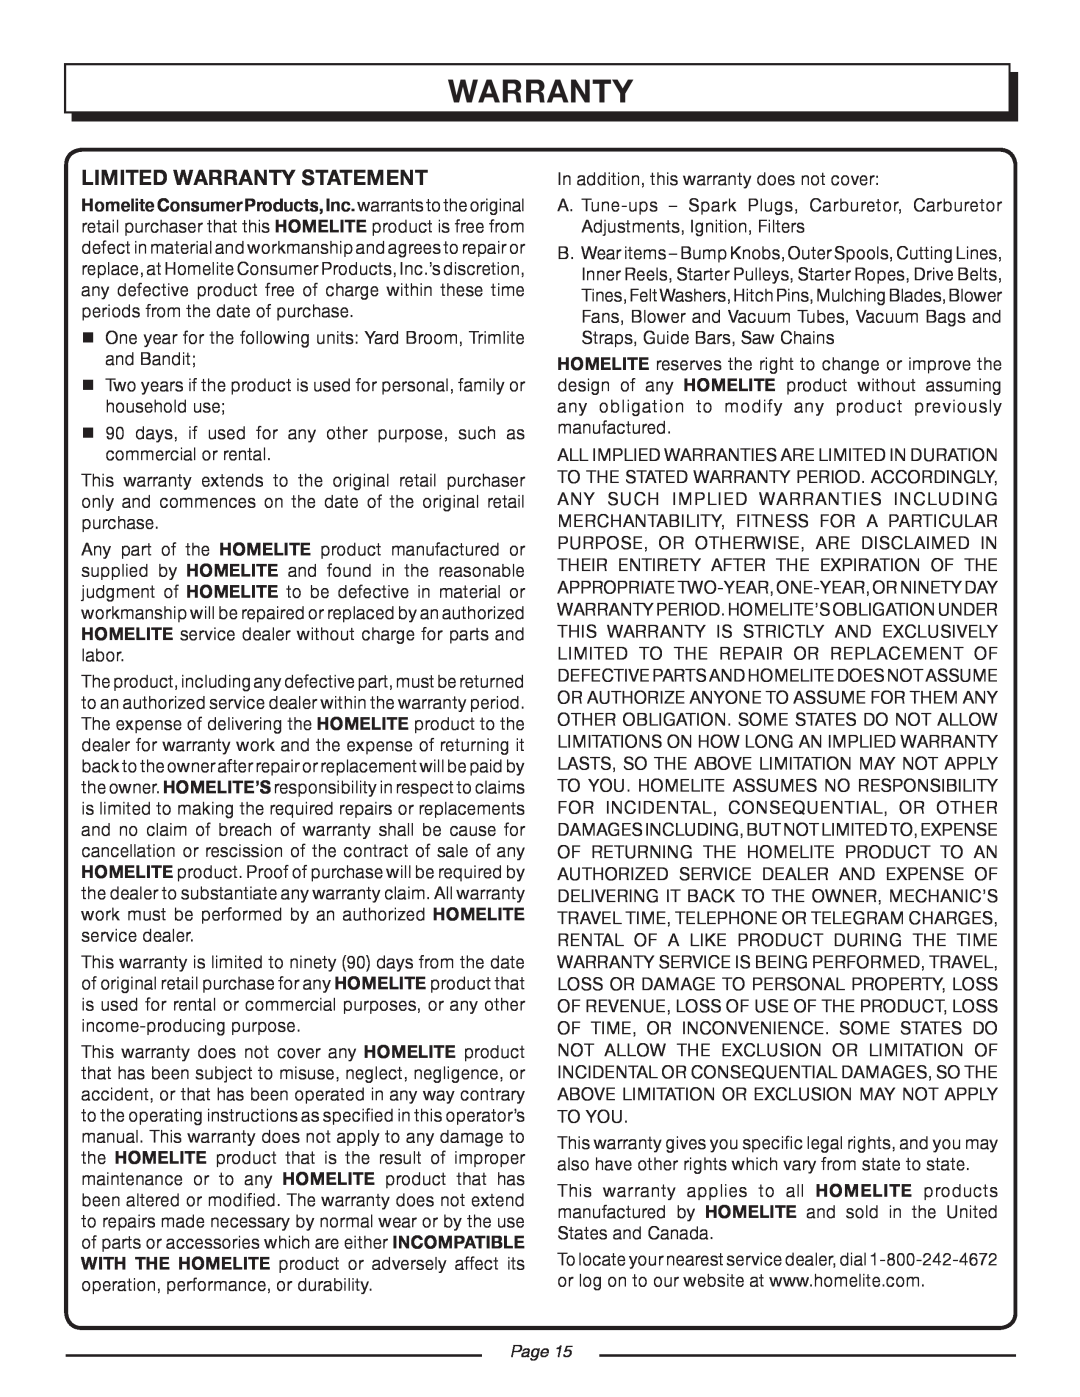 Homelite UT08934D manual Limited Warranty Statement, Page 